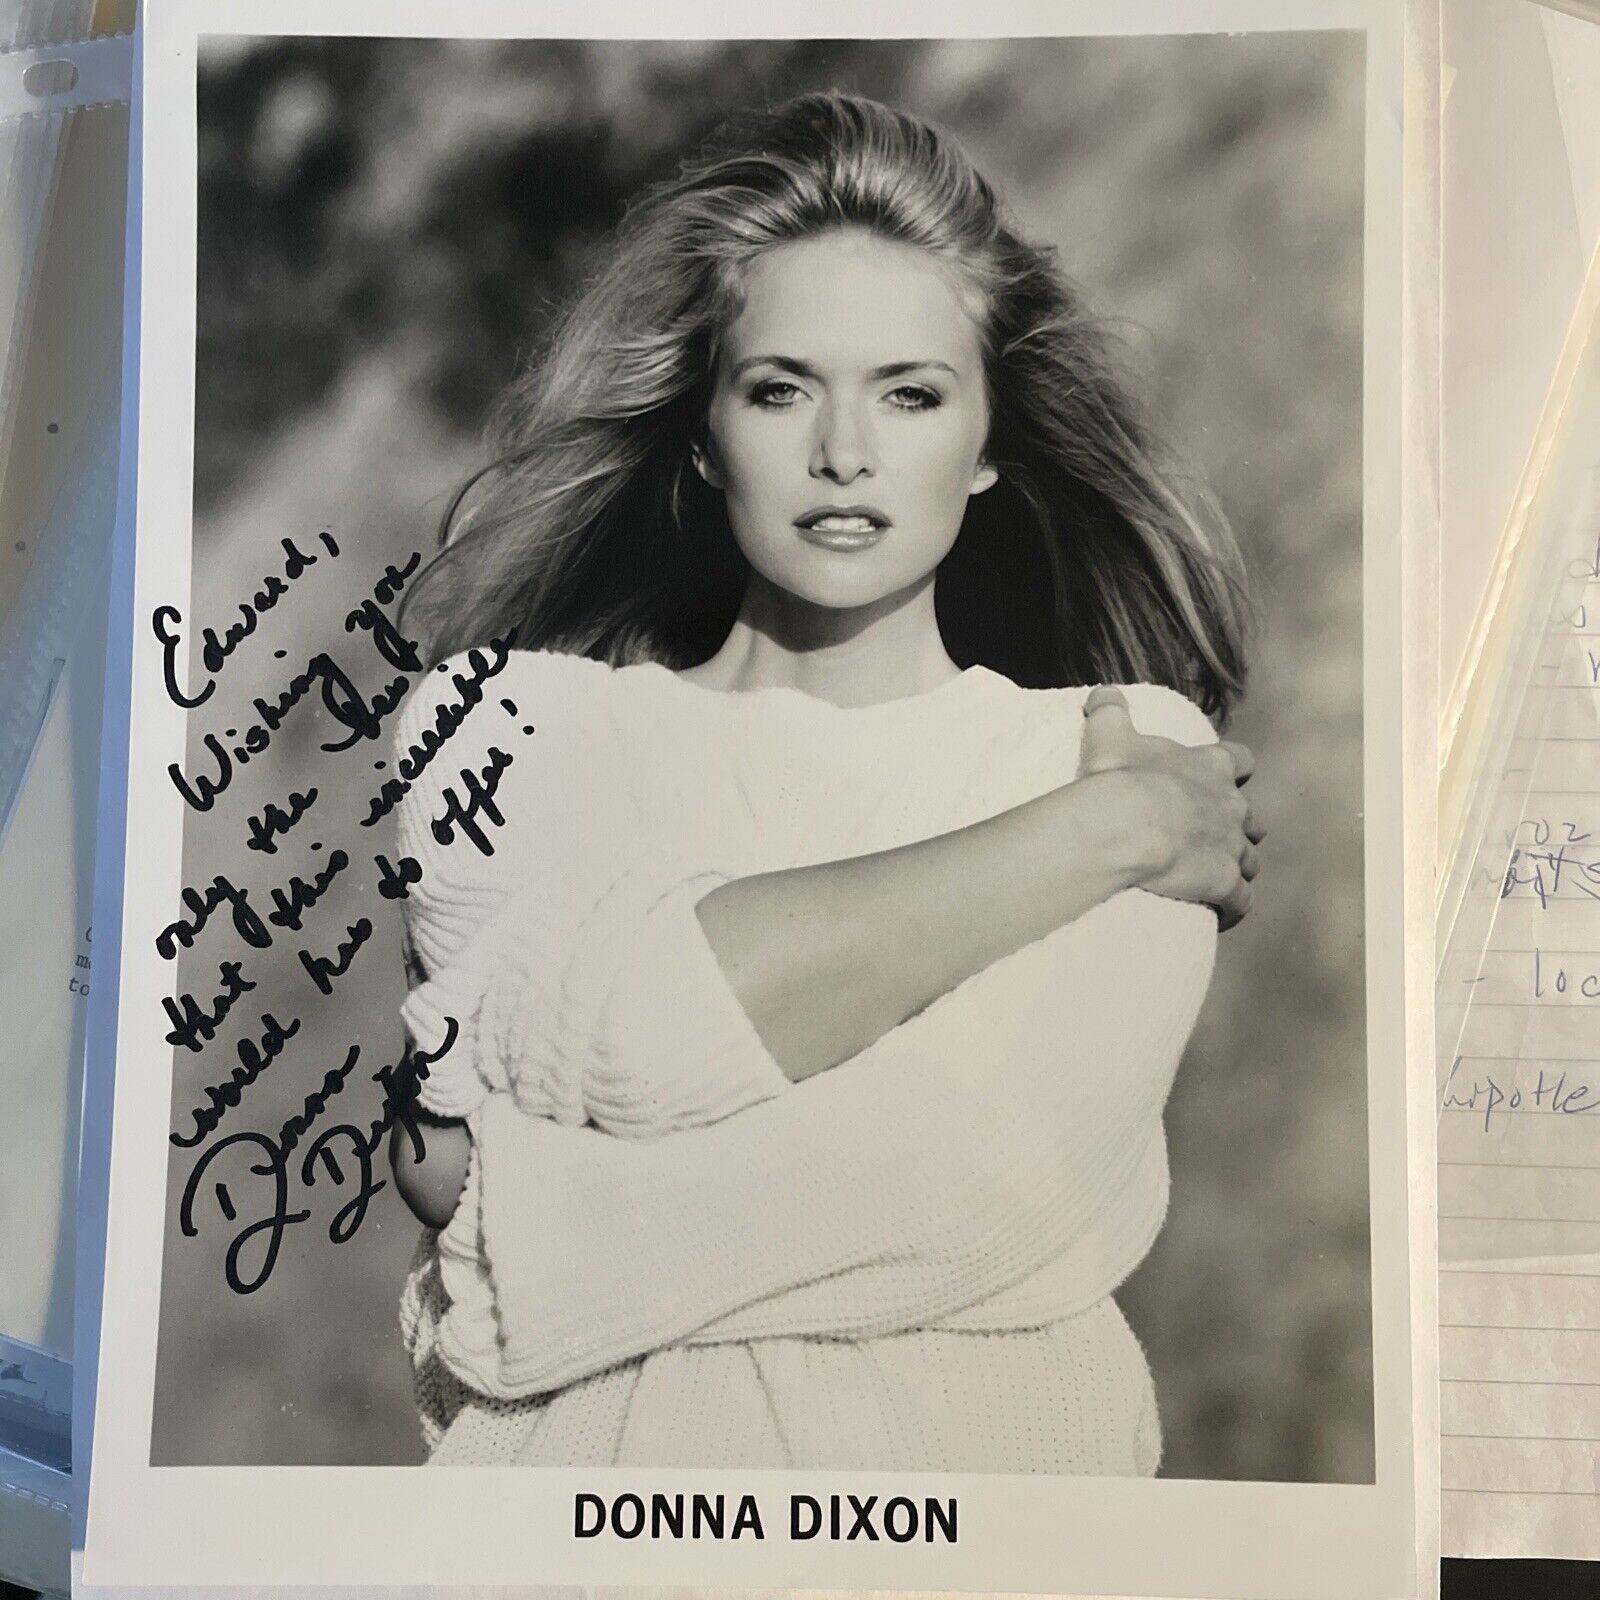 DONNA DIXON Signed Photo Poster painting Autographed 8x10 SPIES LIKE US The Nanny NIXON COA 11/